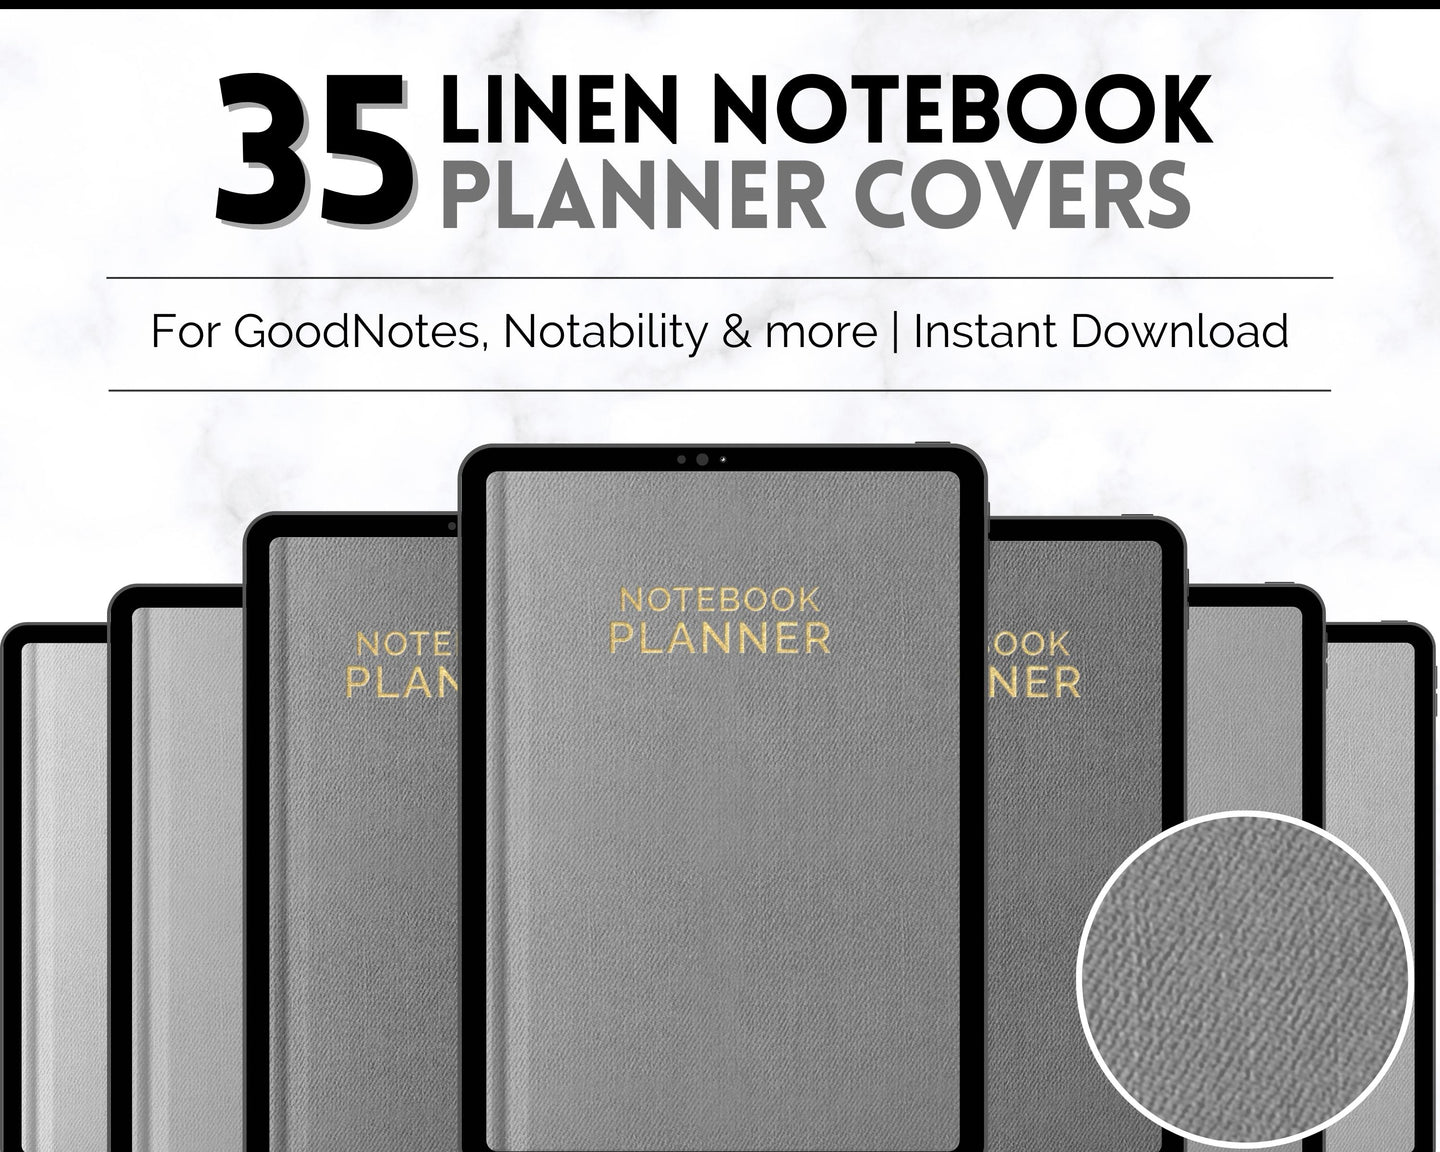 35 Digital Planner Notebook Covers | Digital Journal Covers for GoodNotes & iPad | Linen Texture Mono